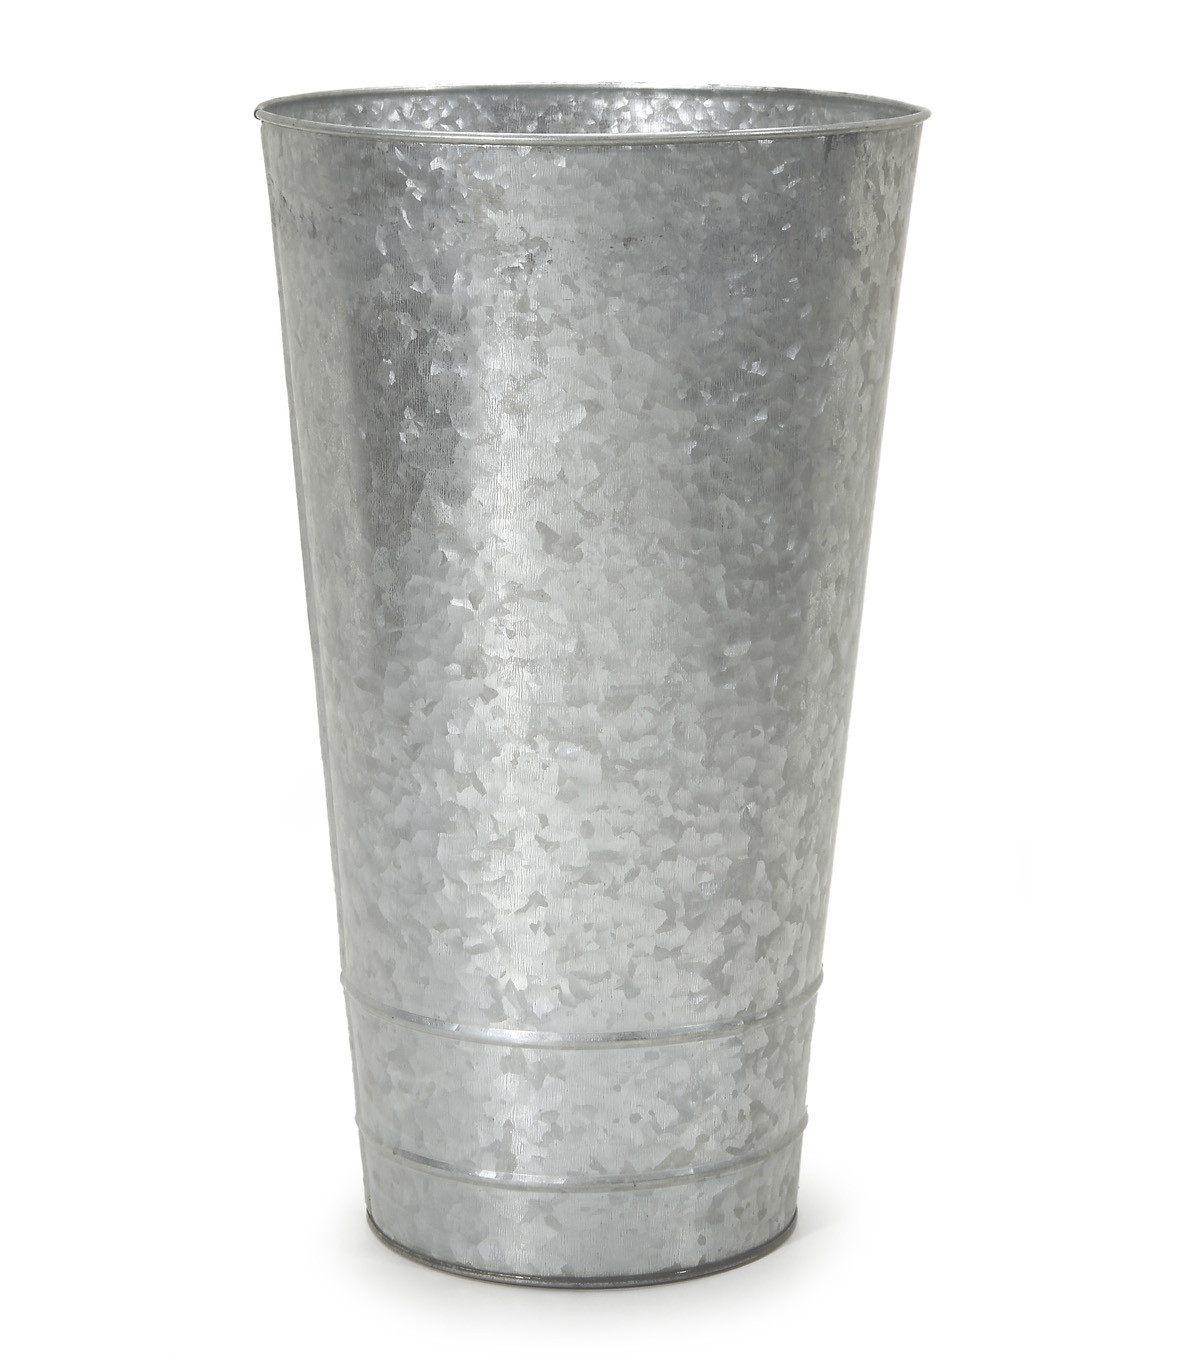 17 Awesome Tall Galvanized Floor Vase 2023 free download tall galvanized floor vase of tall galvanized vase gallery galvanized french vase vase and cellar for tall galvanized vase gallery galvanized french vase vase and cellar image avorcor of tal